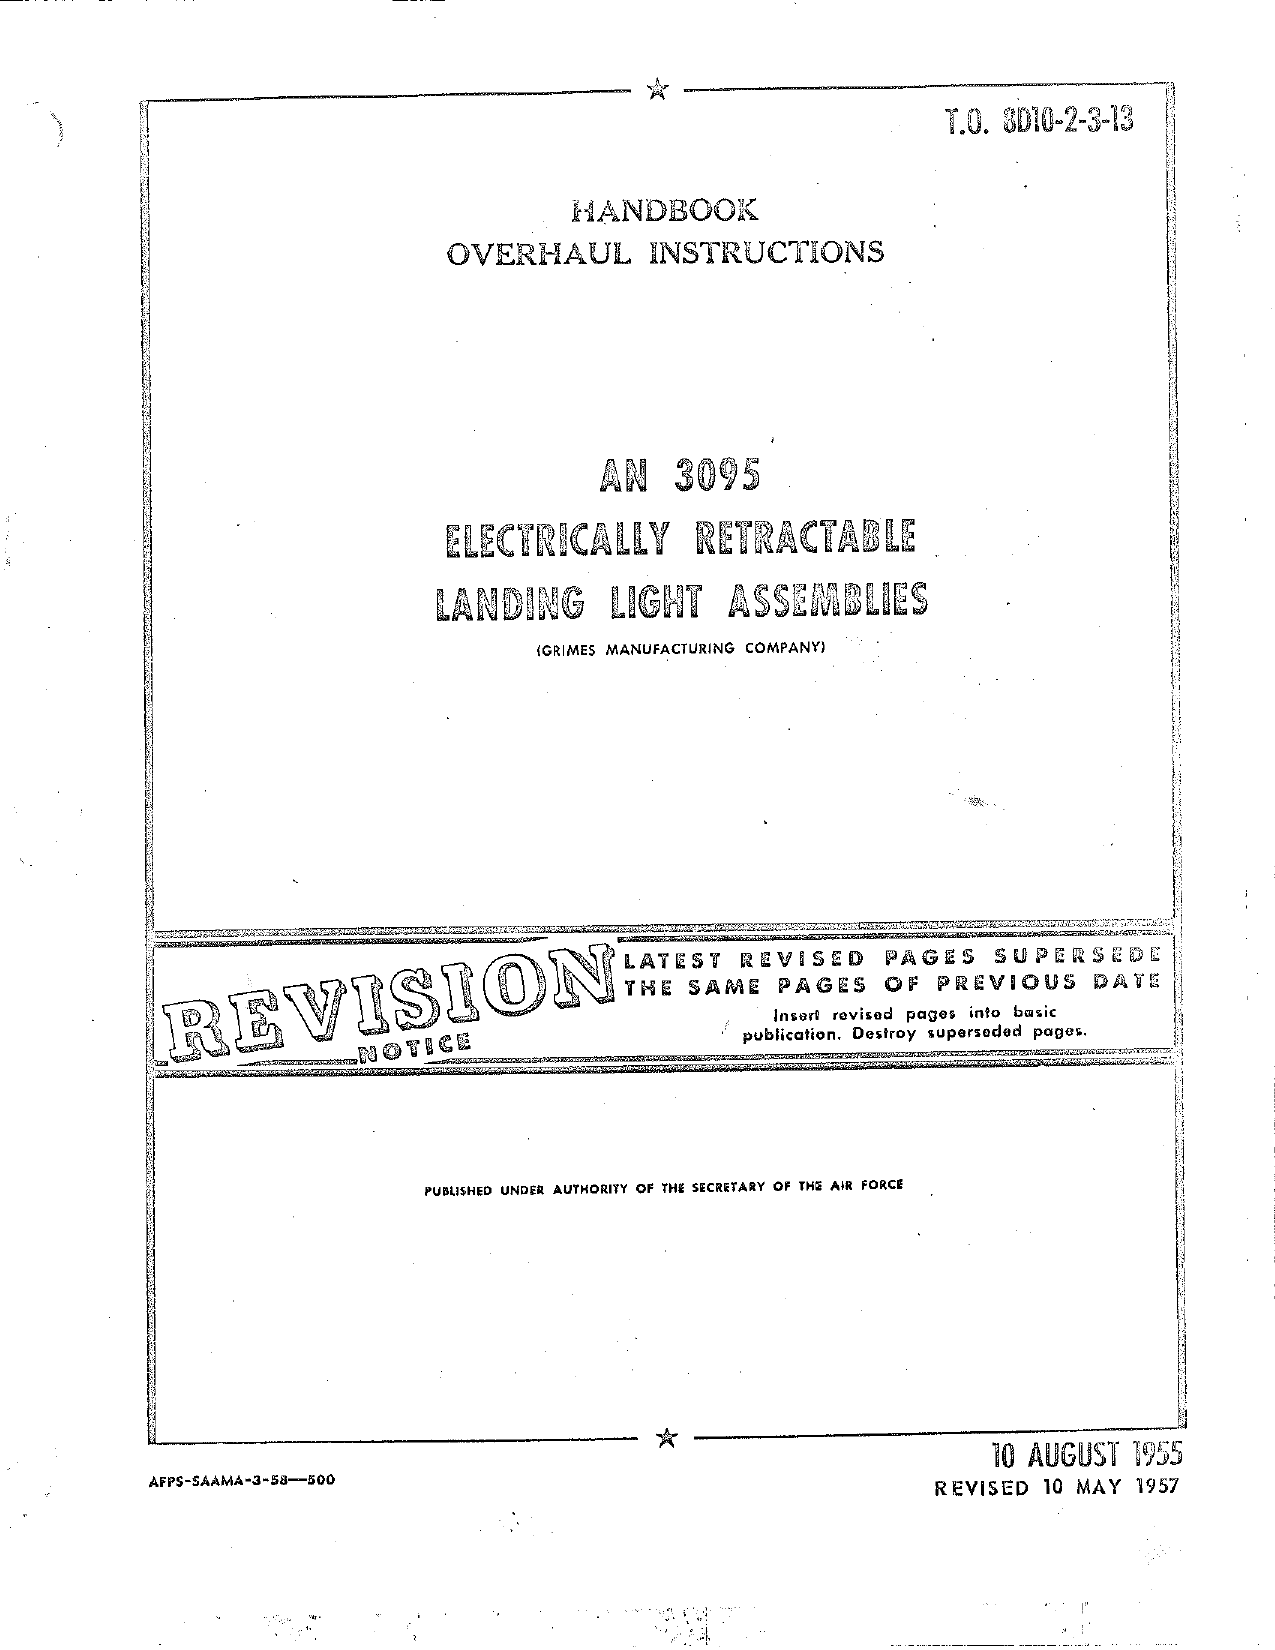 Sample page 1 from AirCorps Library document: Overhaul Instructions for Electrically Retractable Landing Light Assembly - AN 3095